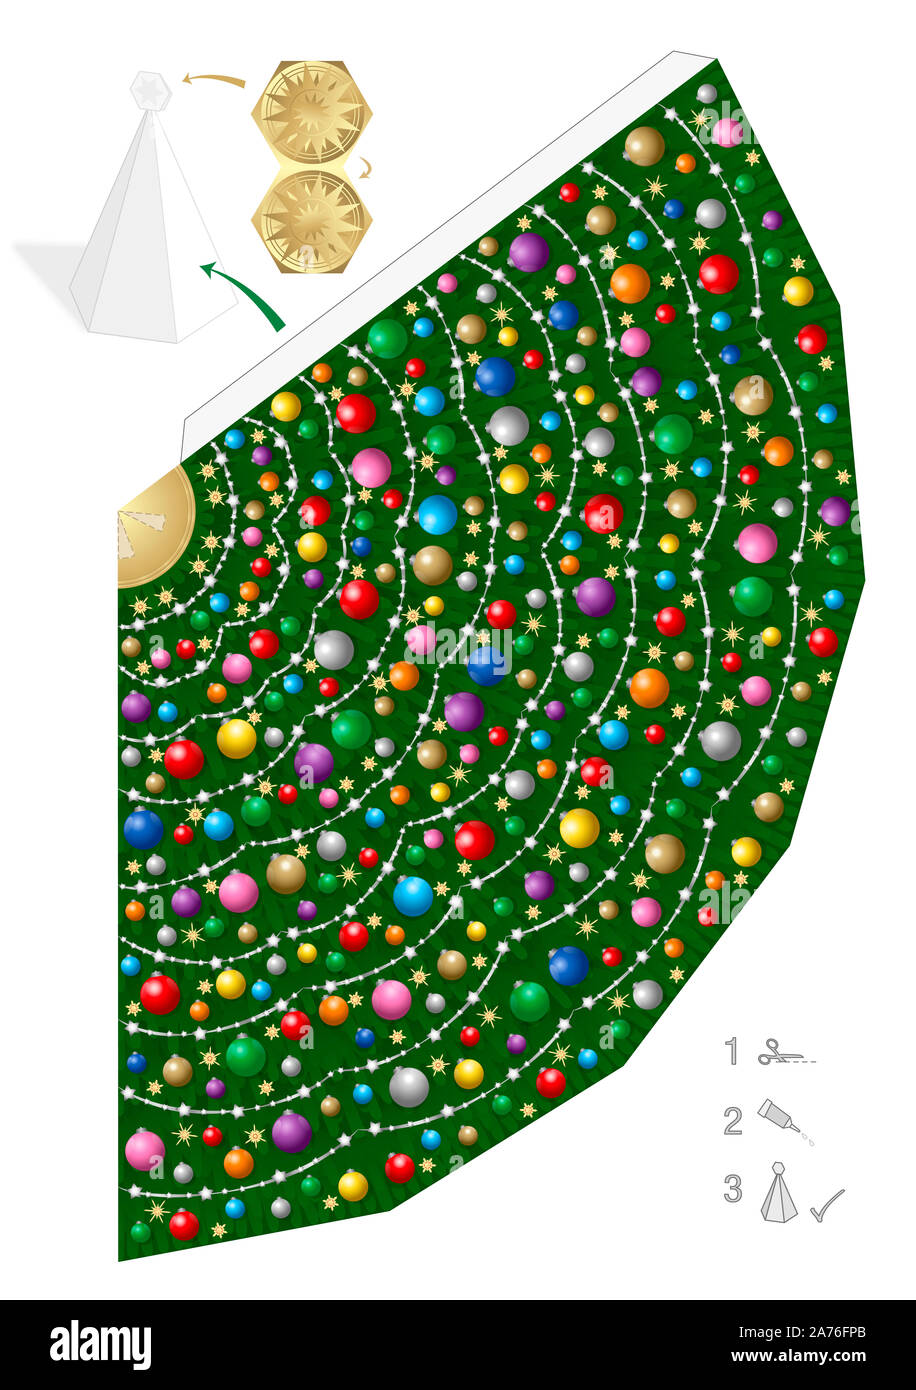 Colorful christmas tree paper model. Creative fun for kindergarten, school or private handicraft lessons - simple template to cut out, fold and glue. Stock Photo